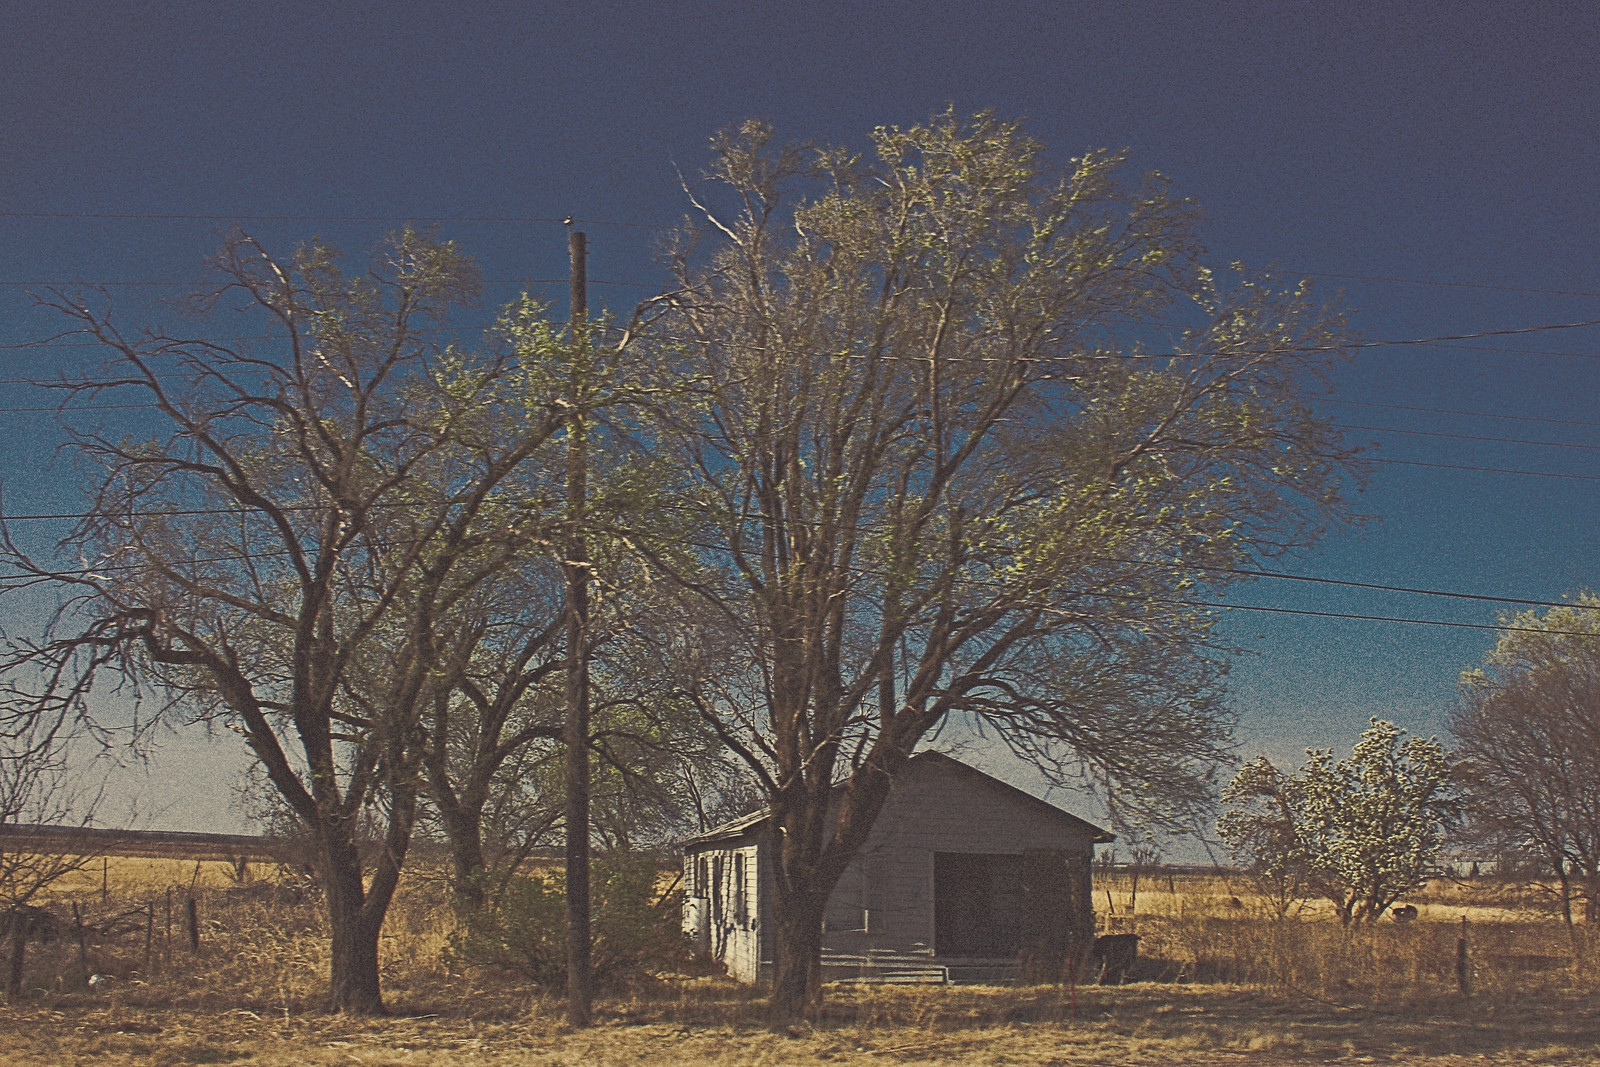 Beyond Chillicothe, Texas, 2008, Processed 2021